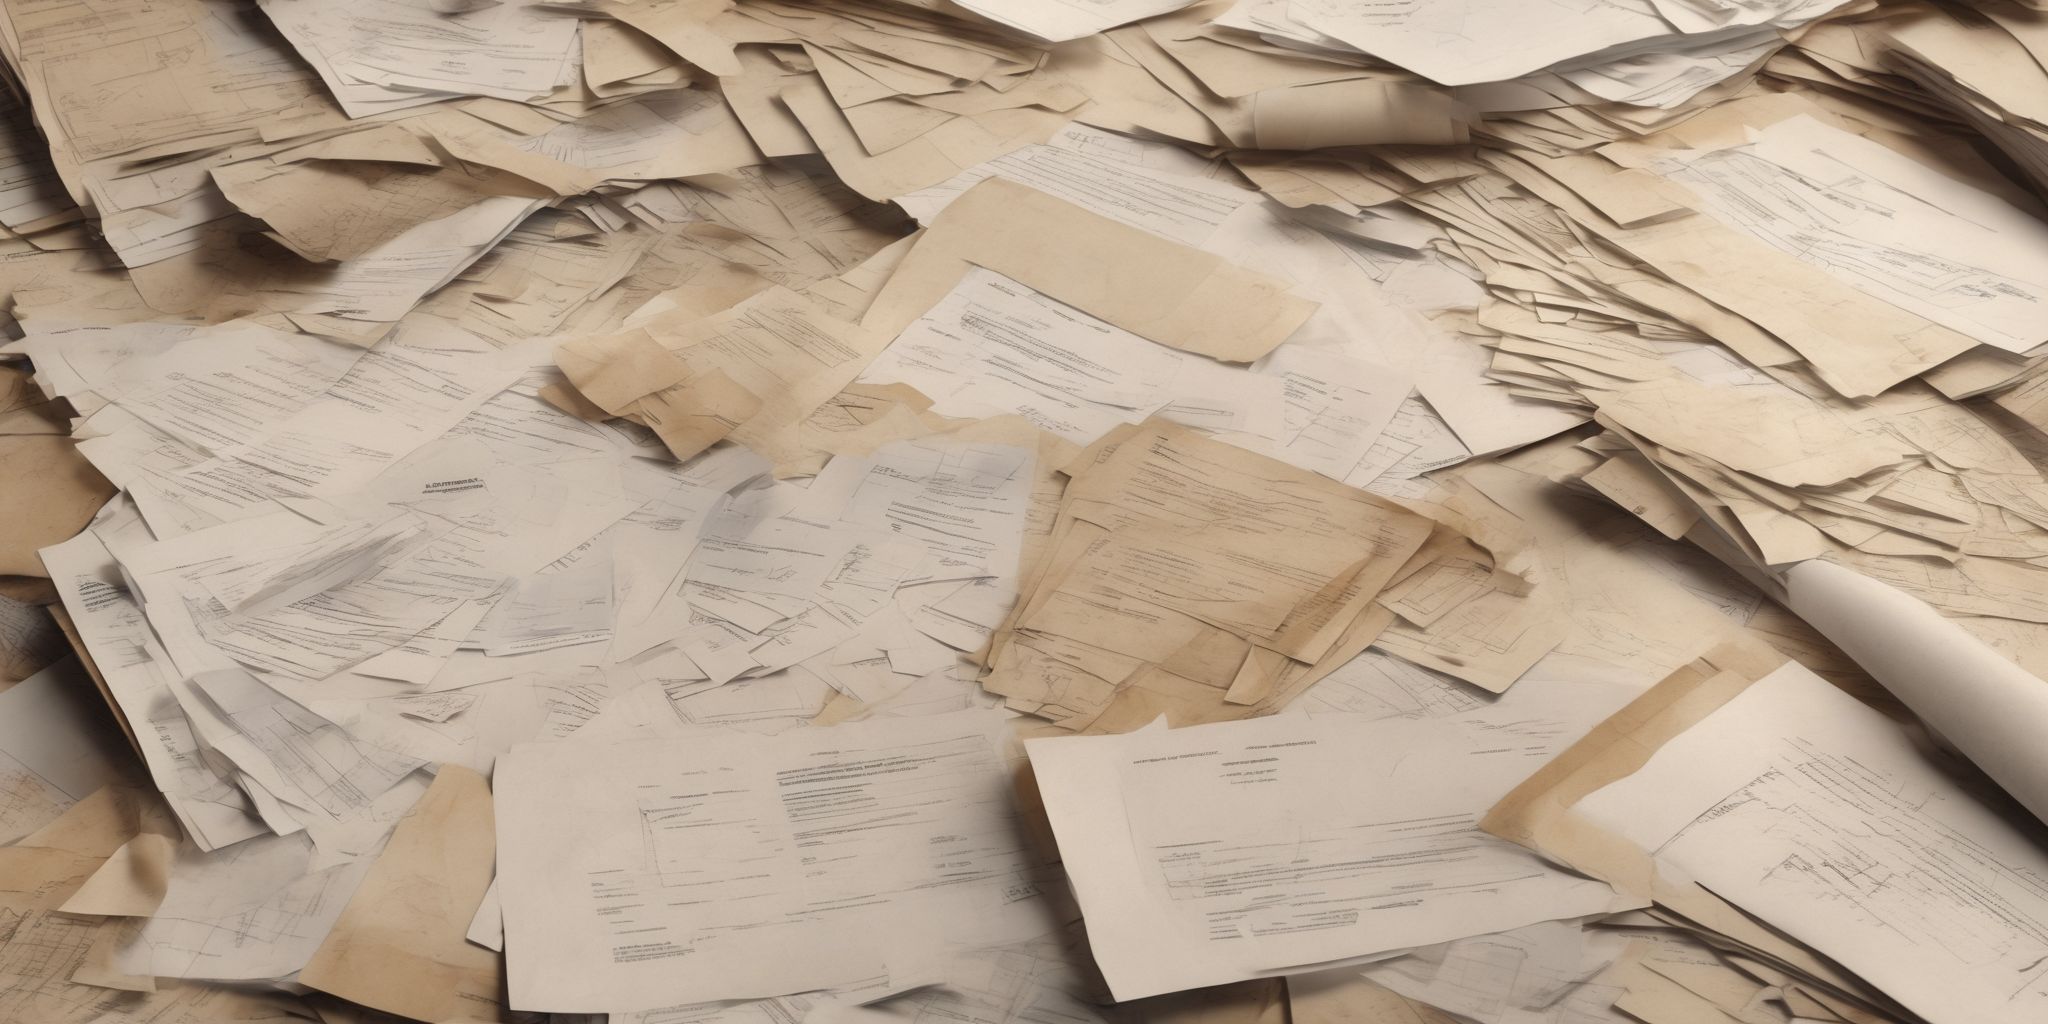 Documents  in realistic, photographic style